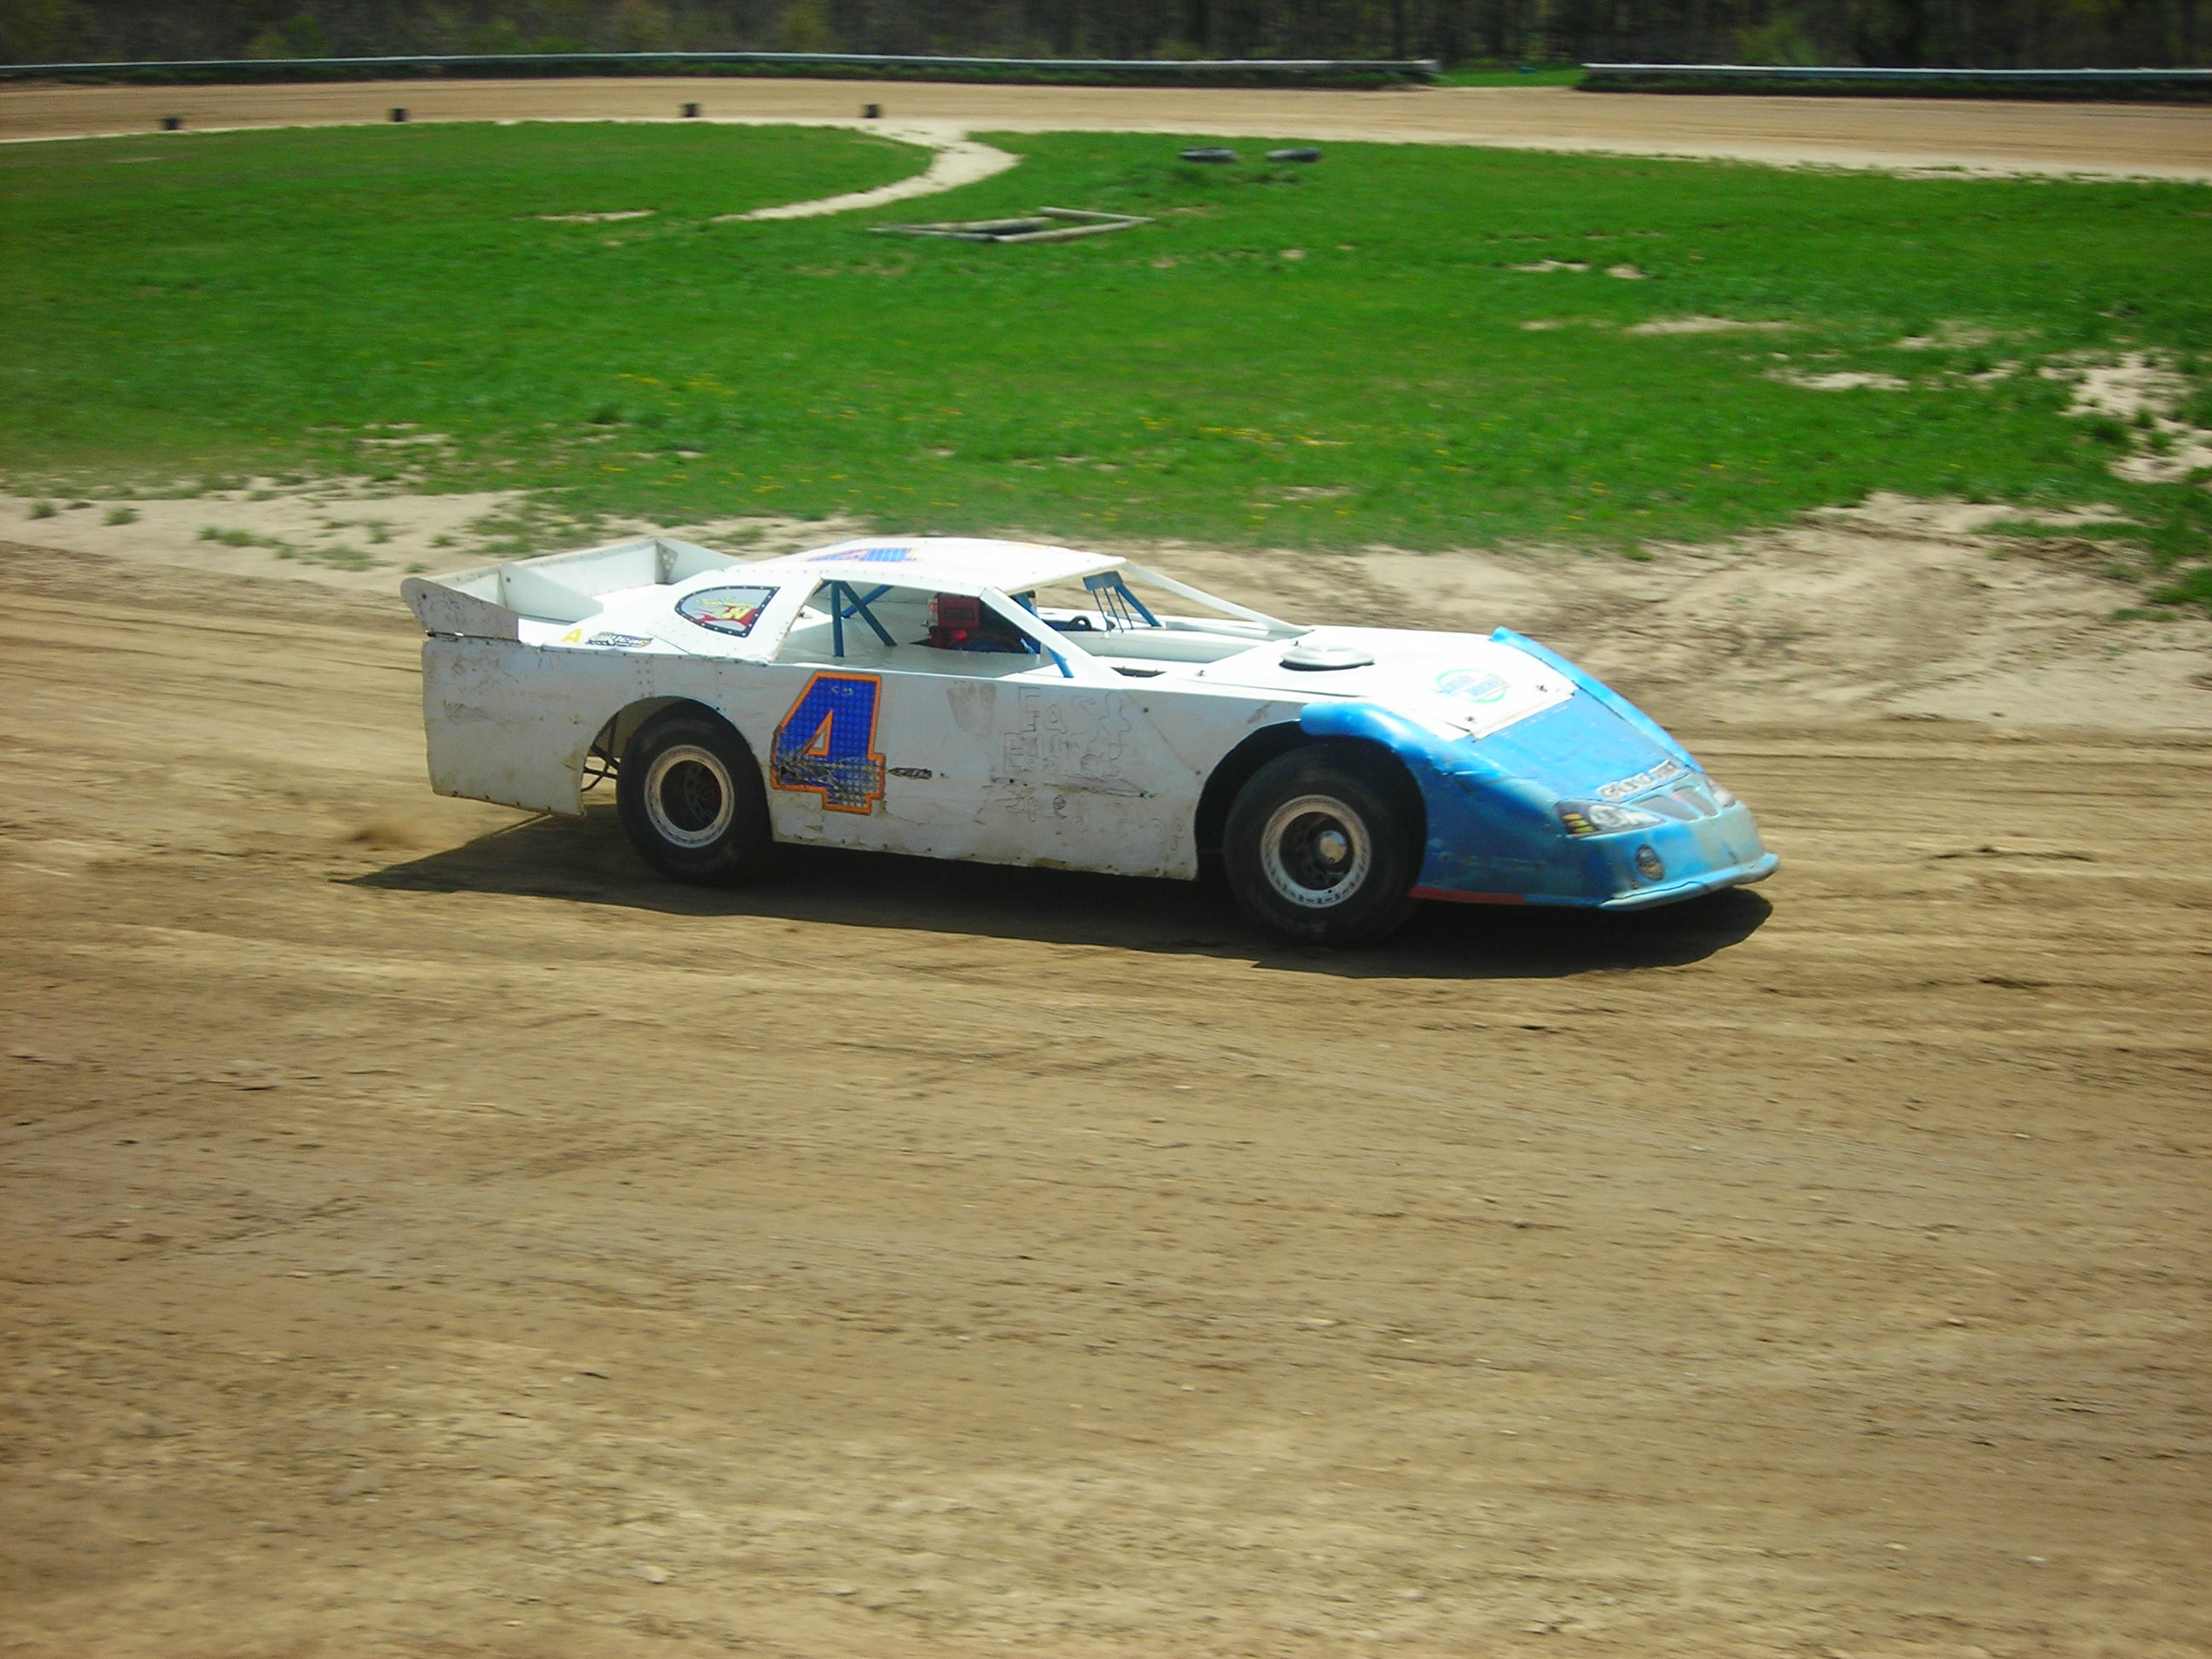 Practicing with the Late Model